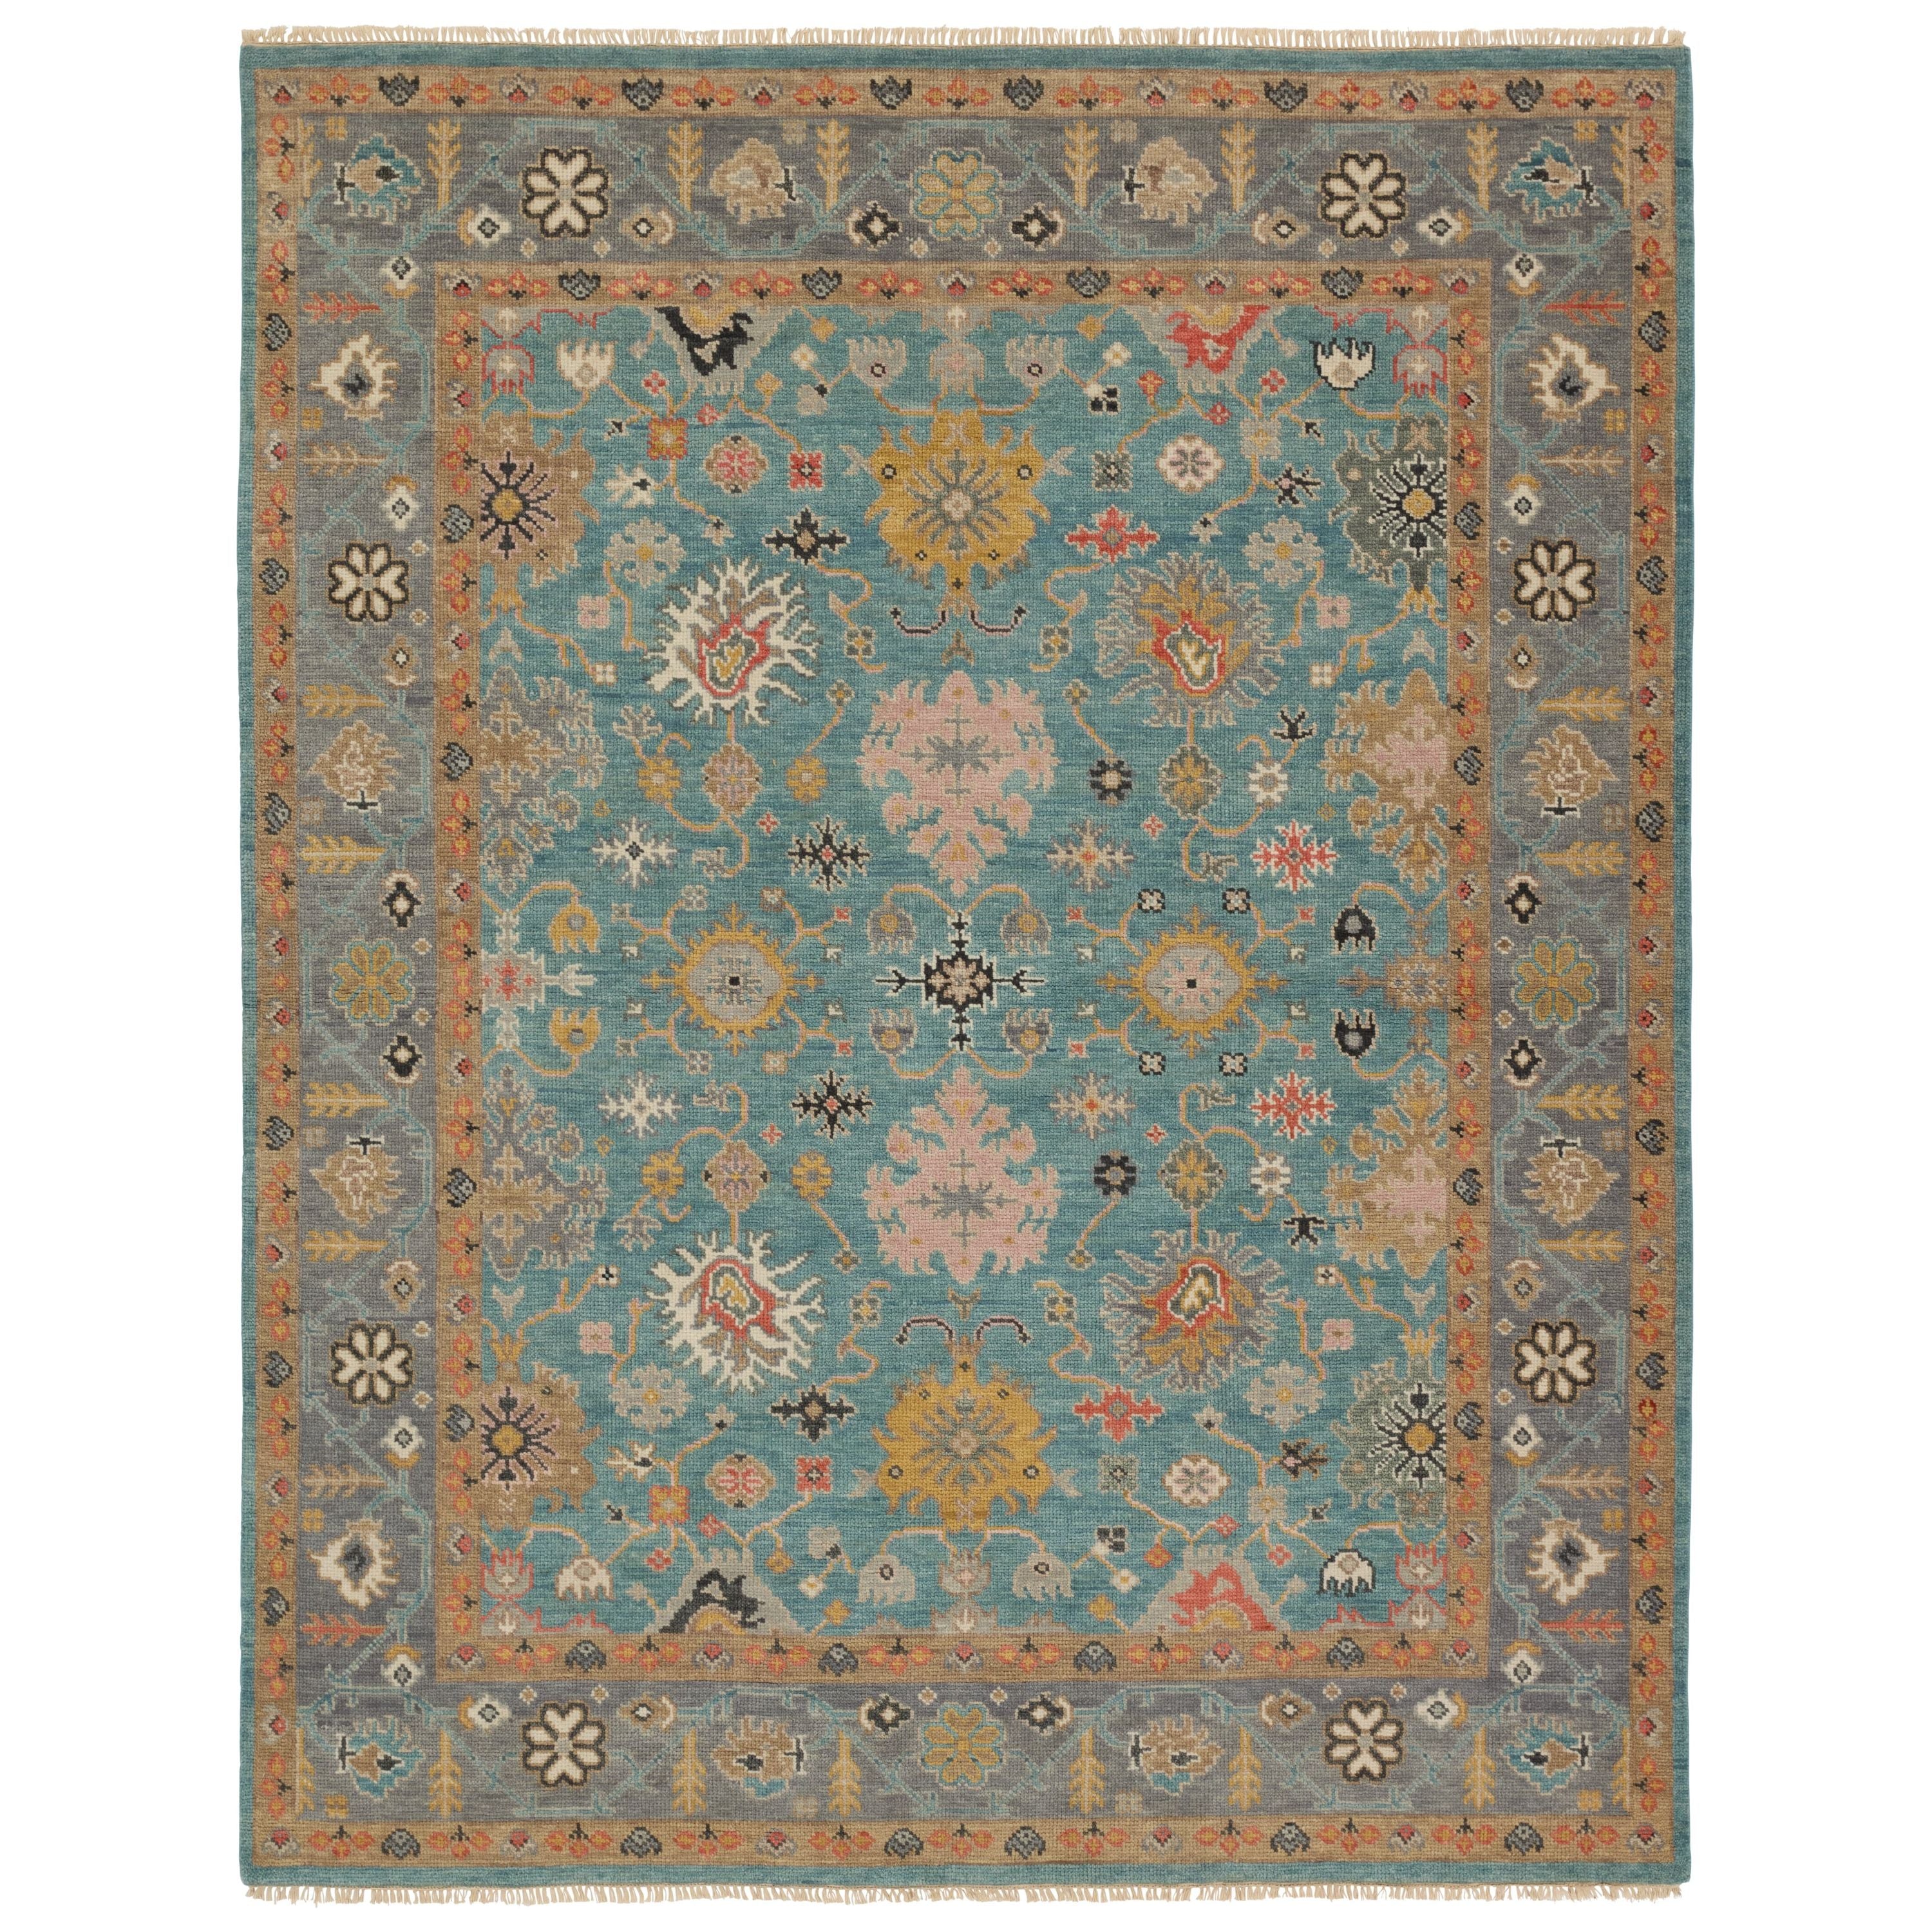 The updated traditional Everly collection features Oushak-inspired designs in whimsical color palettes. The Aloft design features a lively colorway of blue, pink, yellow, navy, cream, peach, and taupe. This hand-knotted wool rug anchors living spaces with a fresh take on vintage style. The low, easy-care pile delights in both high and low traffic areas of the home.  Amethyst Home provides interior design, new construction, custom furniture, and area rugs in the Charlotte metro area.